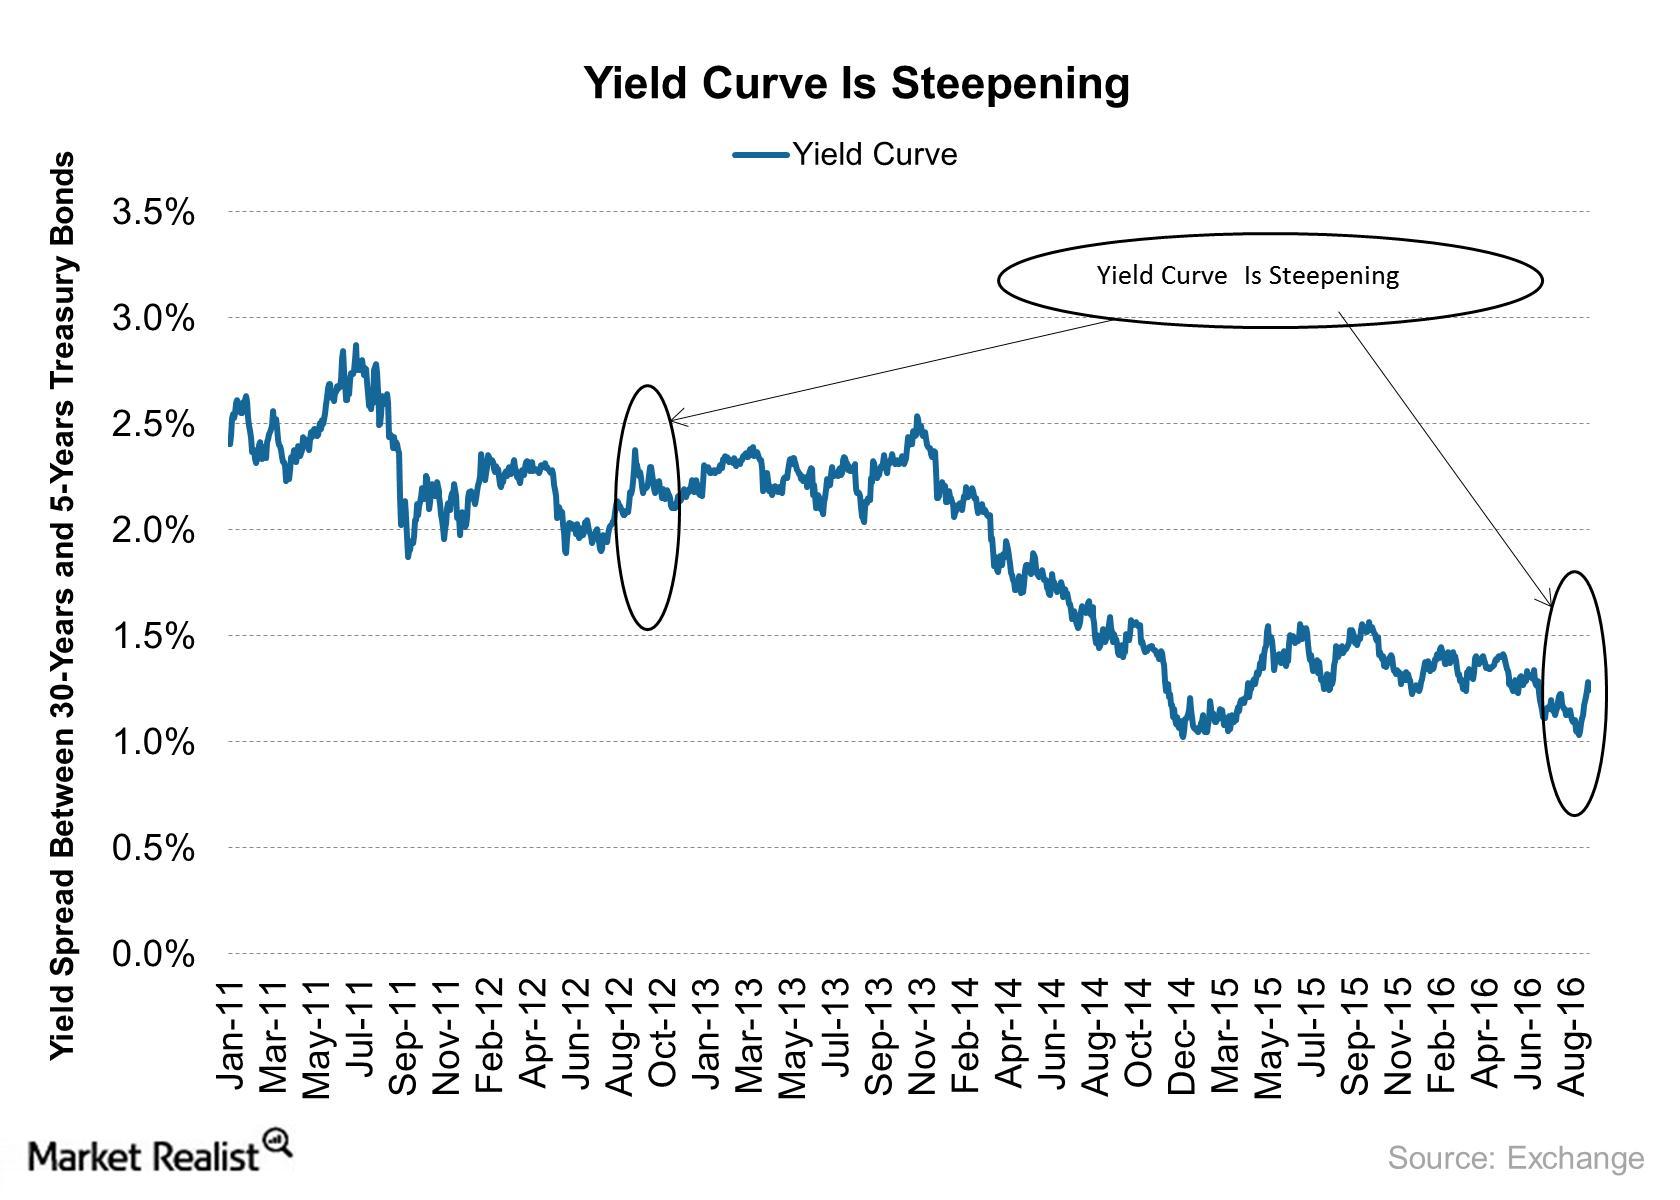 Yield Curve Is Steepening: What Does It Indicate for the Market?